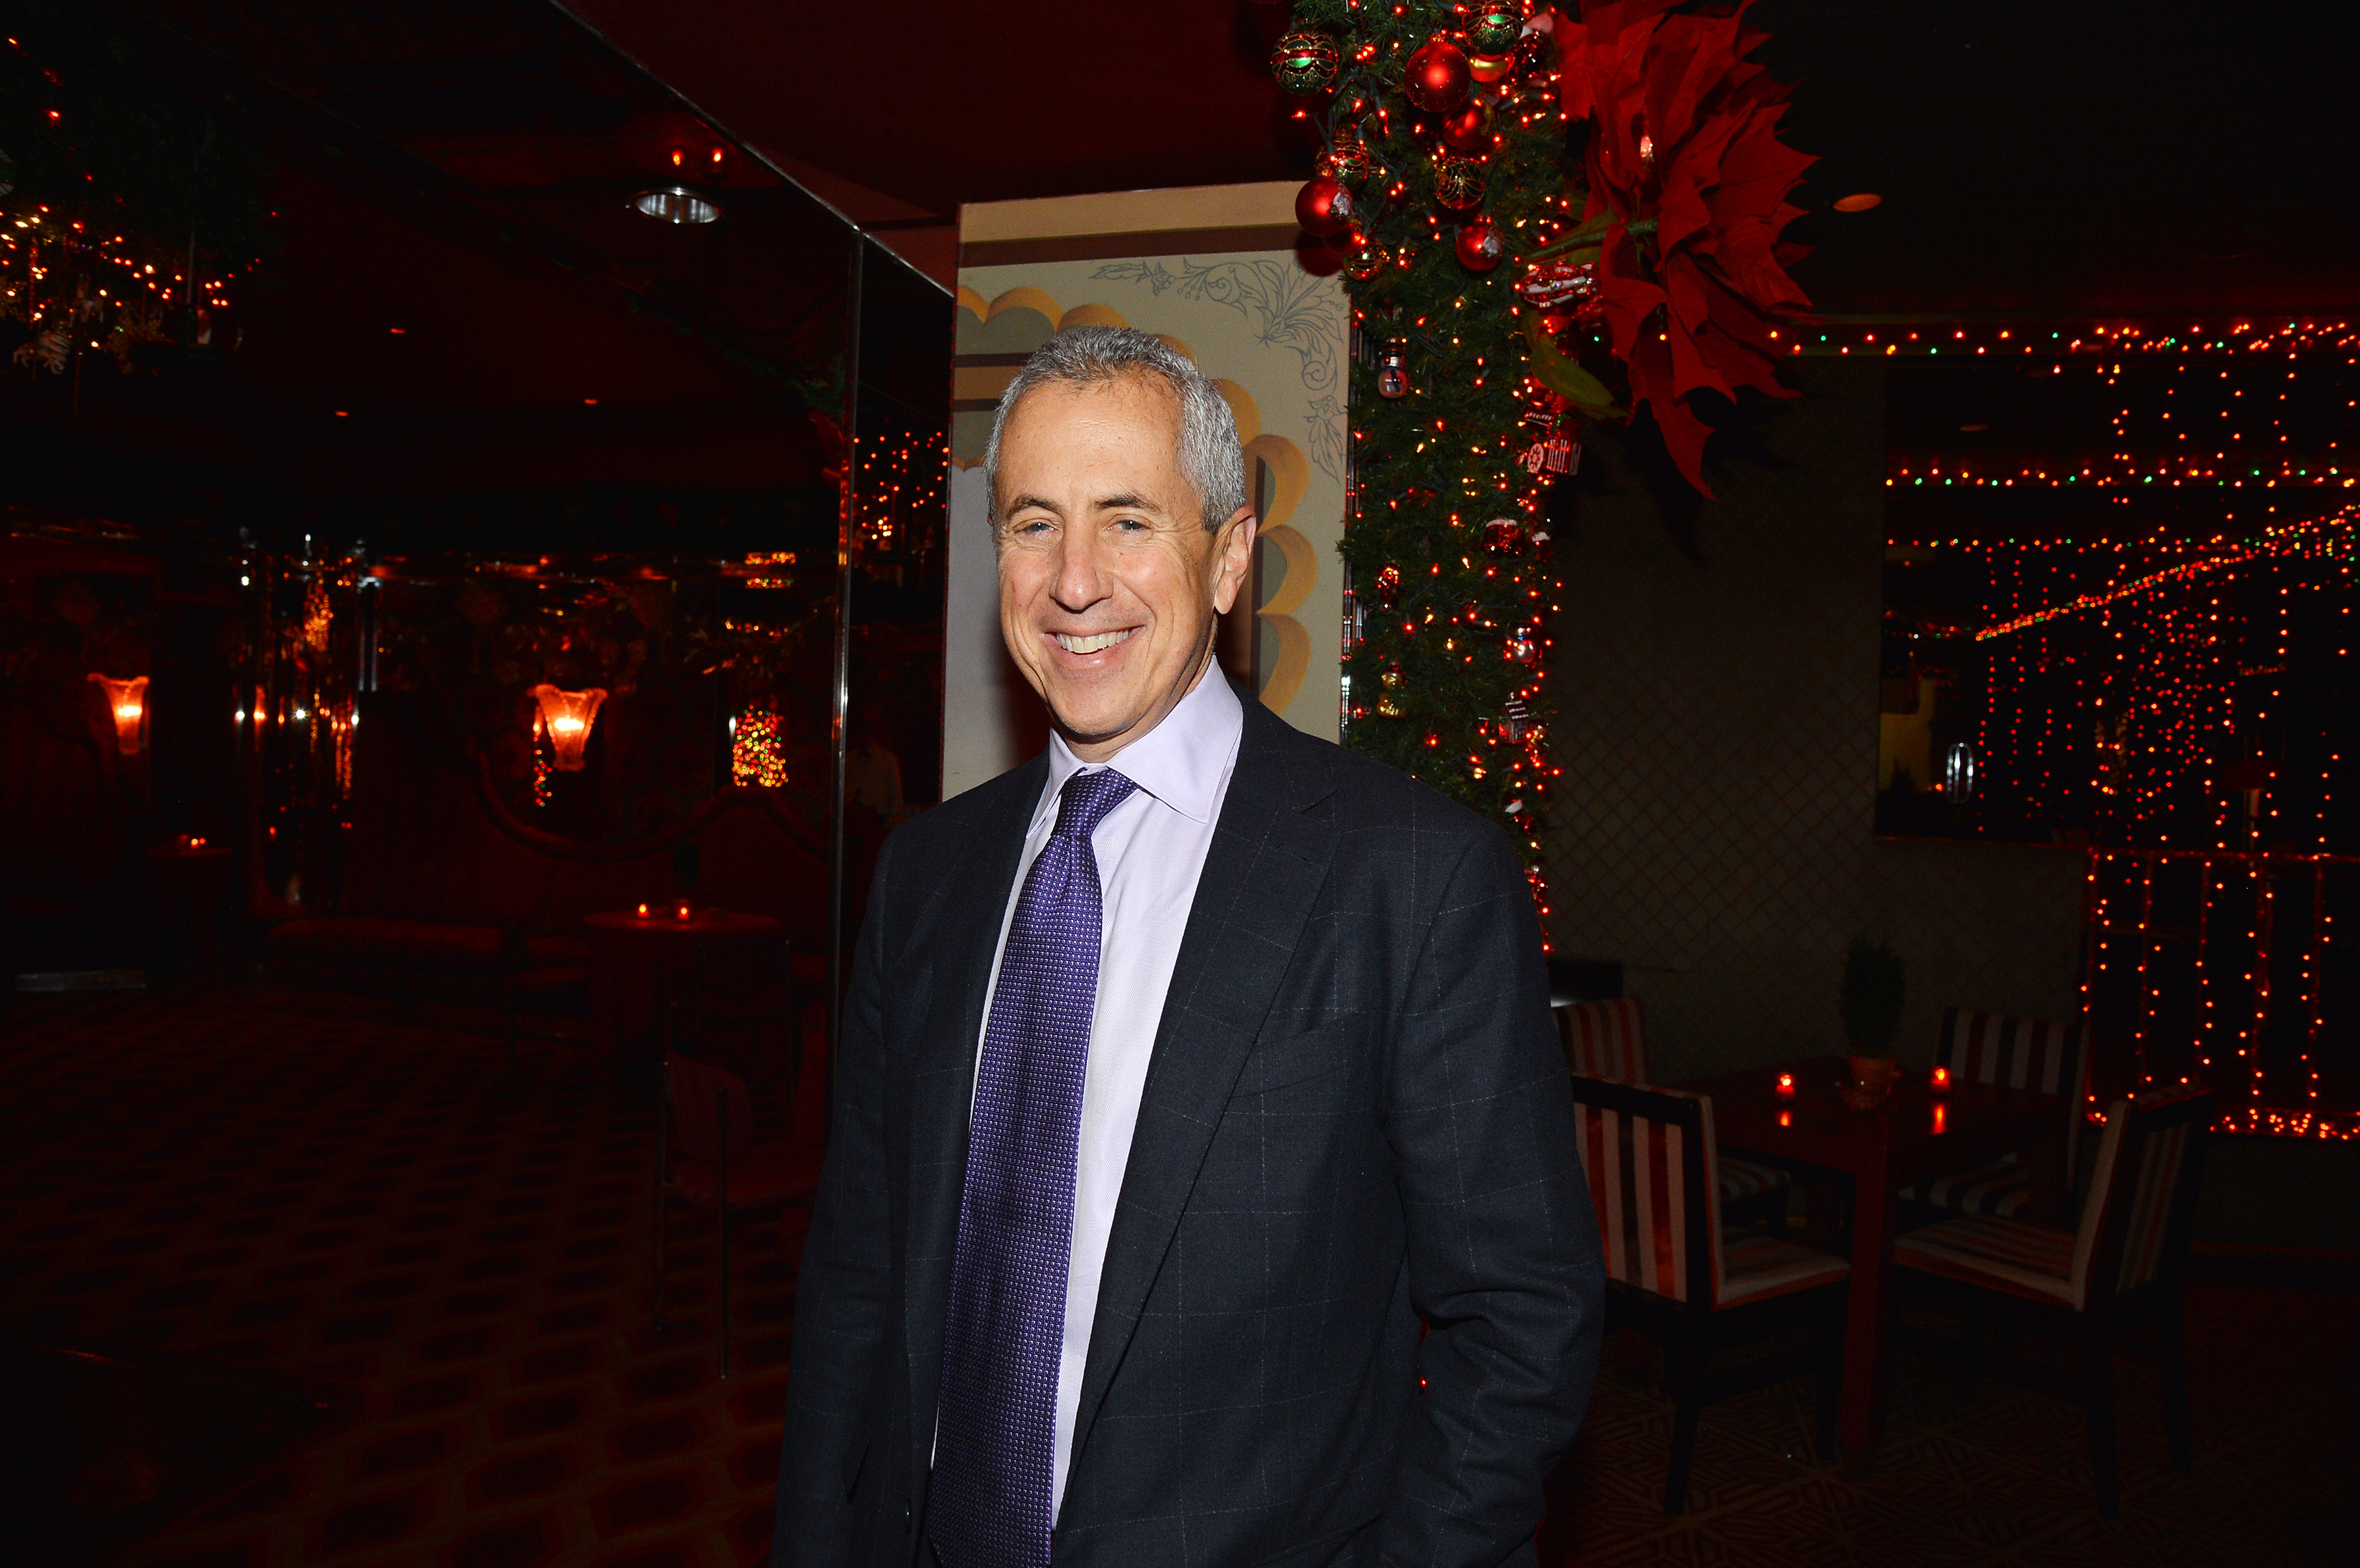 A man, Danny Meyer, at a holiday party